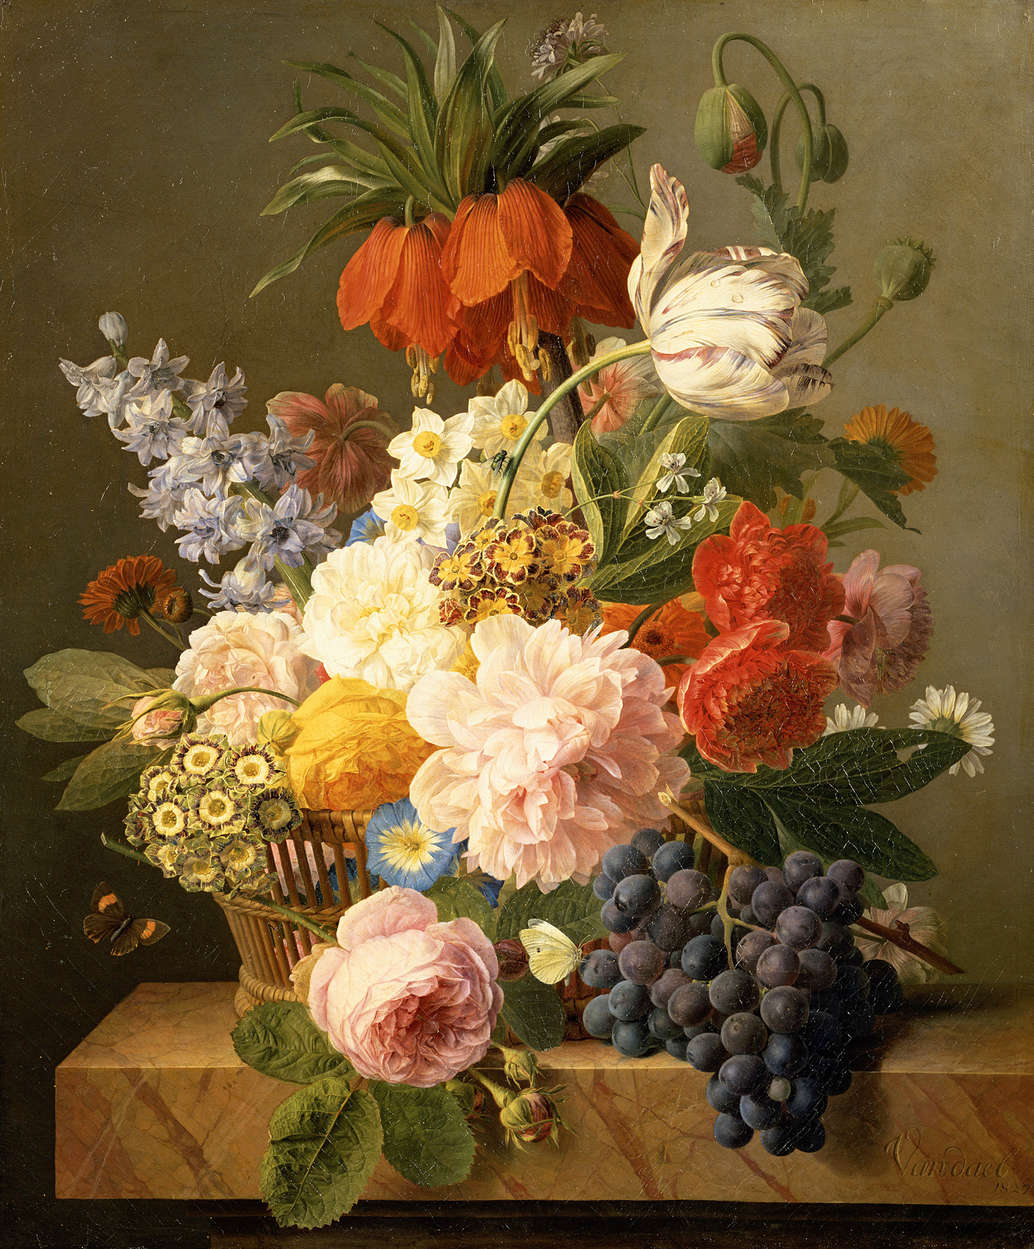             Still life with flowers and fruit mural by Jan van Dael
        